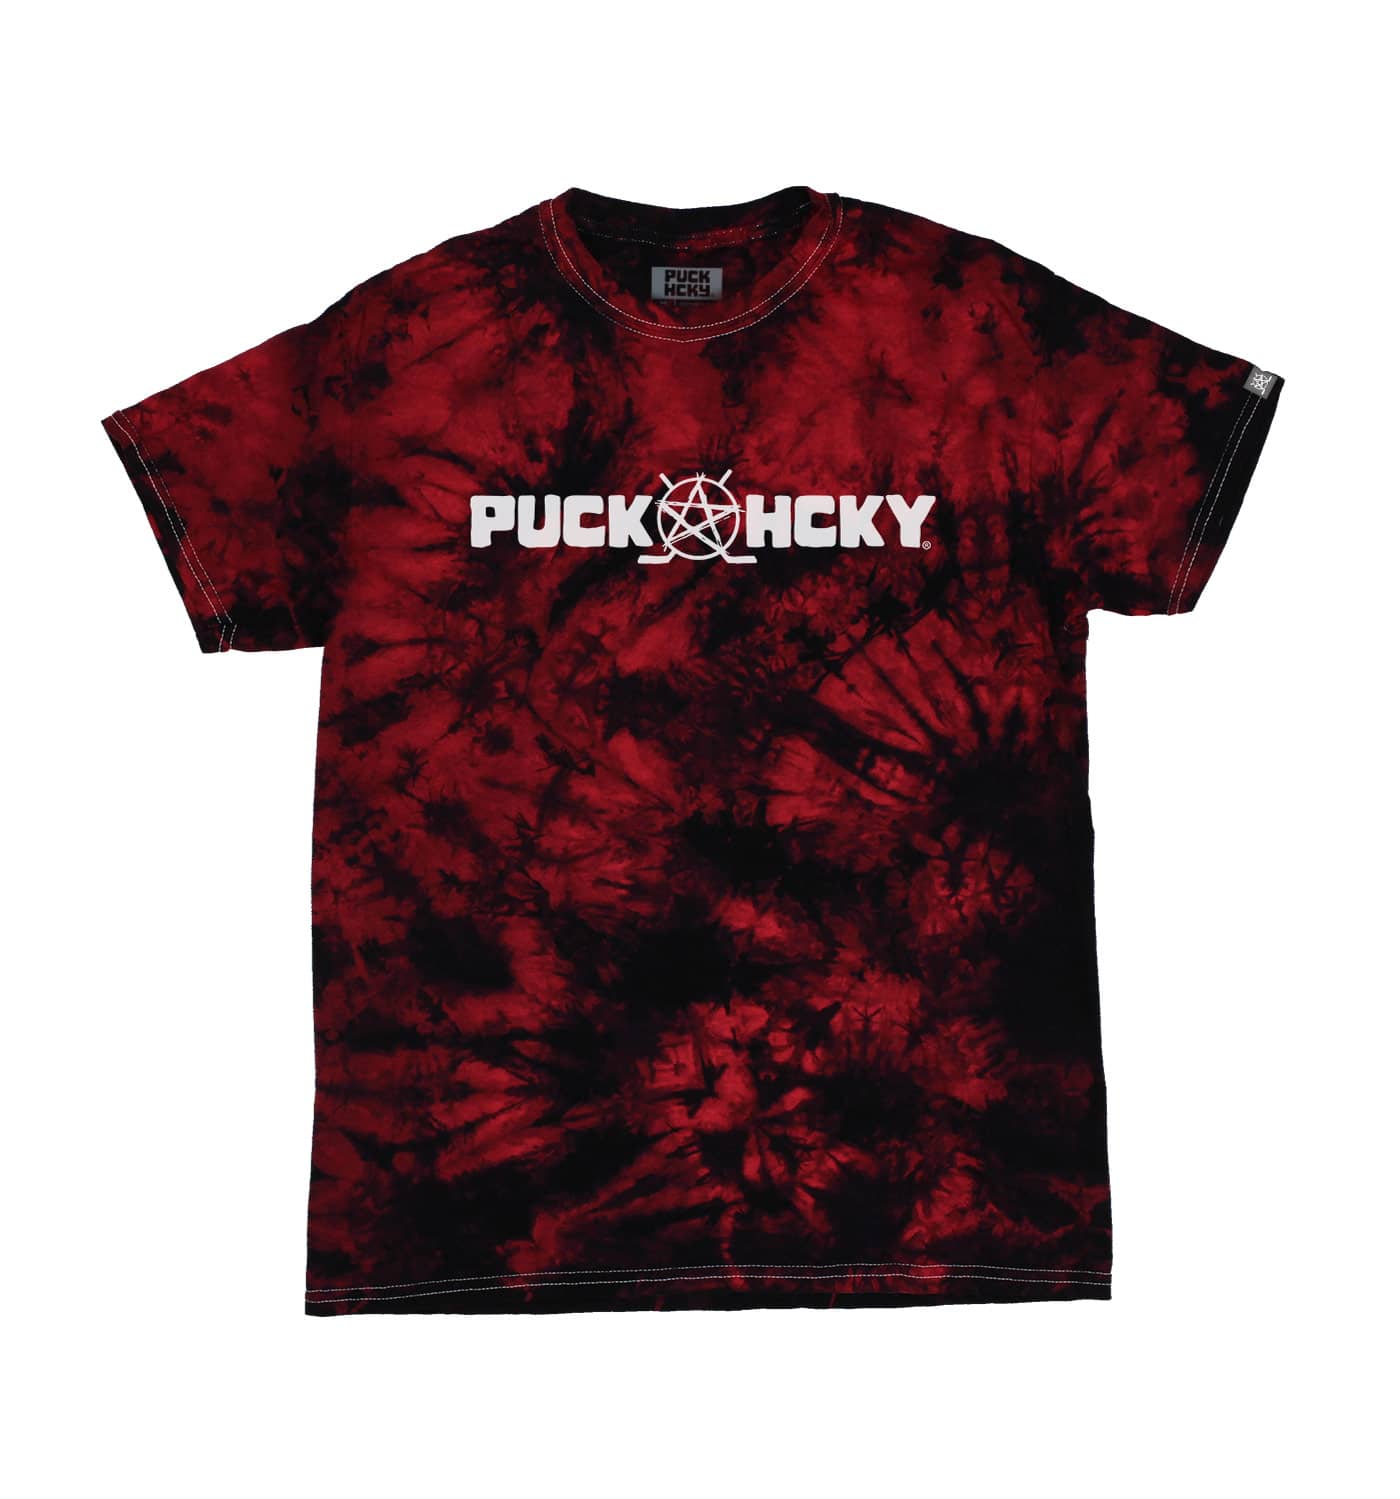 PUCK HCKY 'SKATE MARKS' short sleeve tie-dye hockey t-shirt in red and black front view